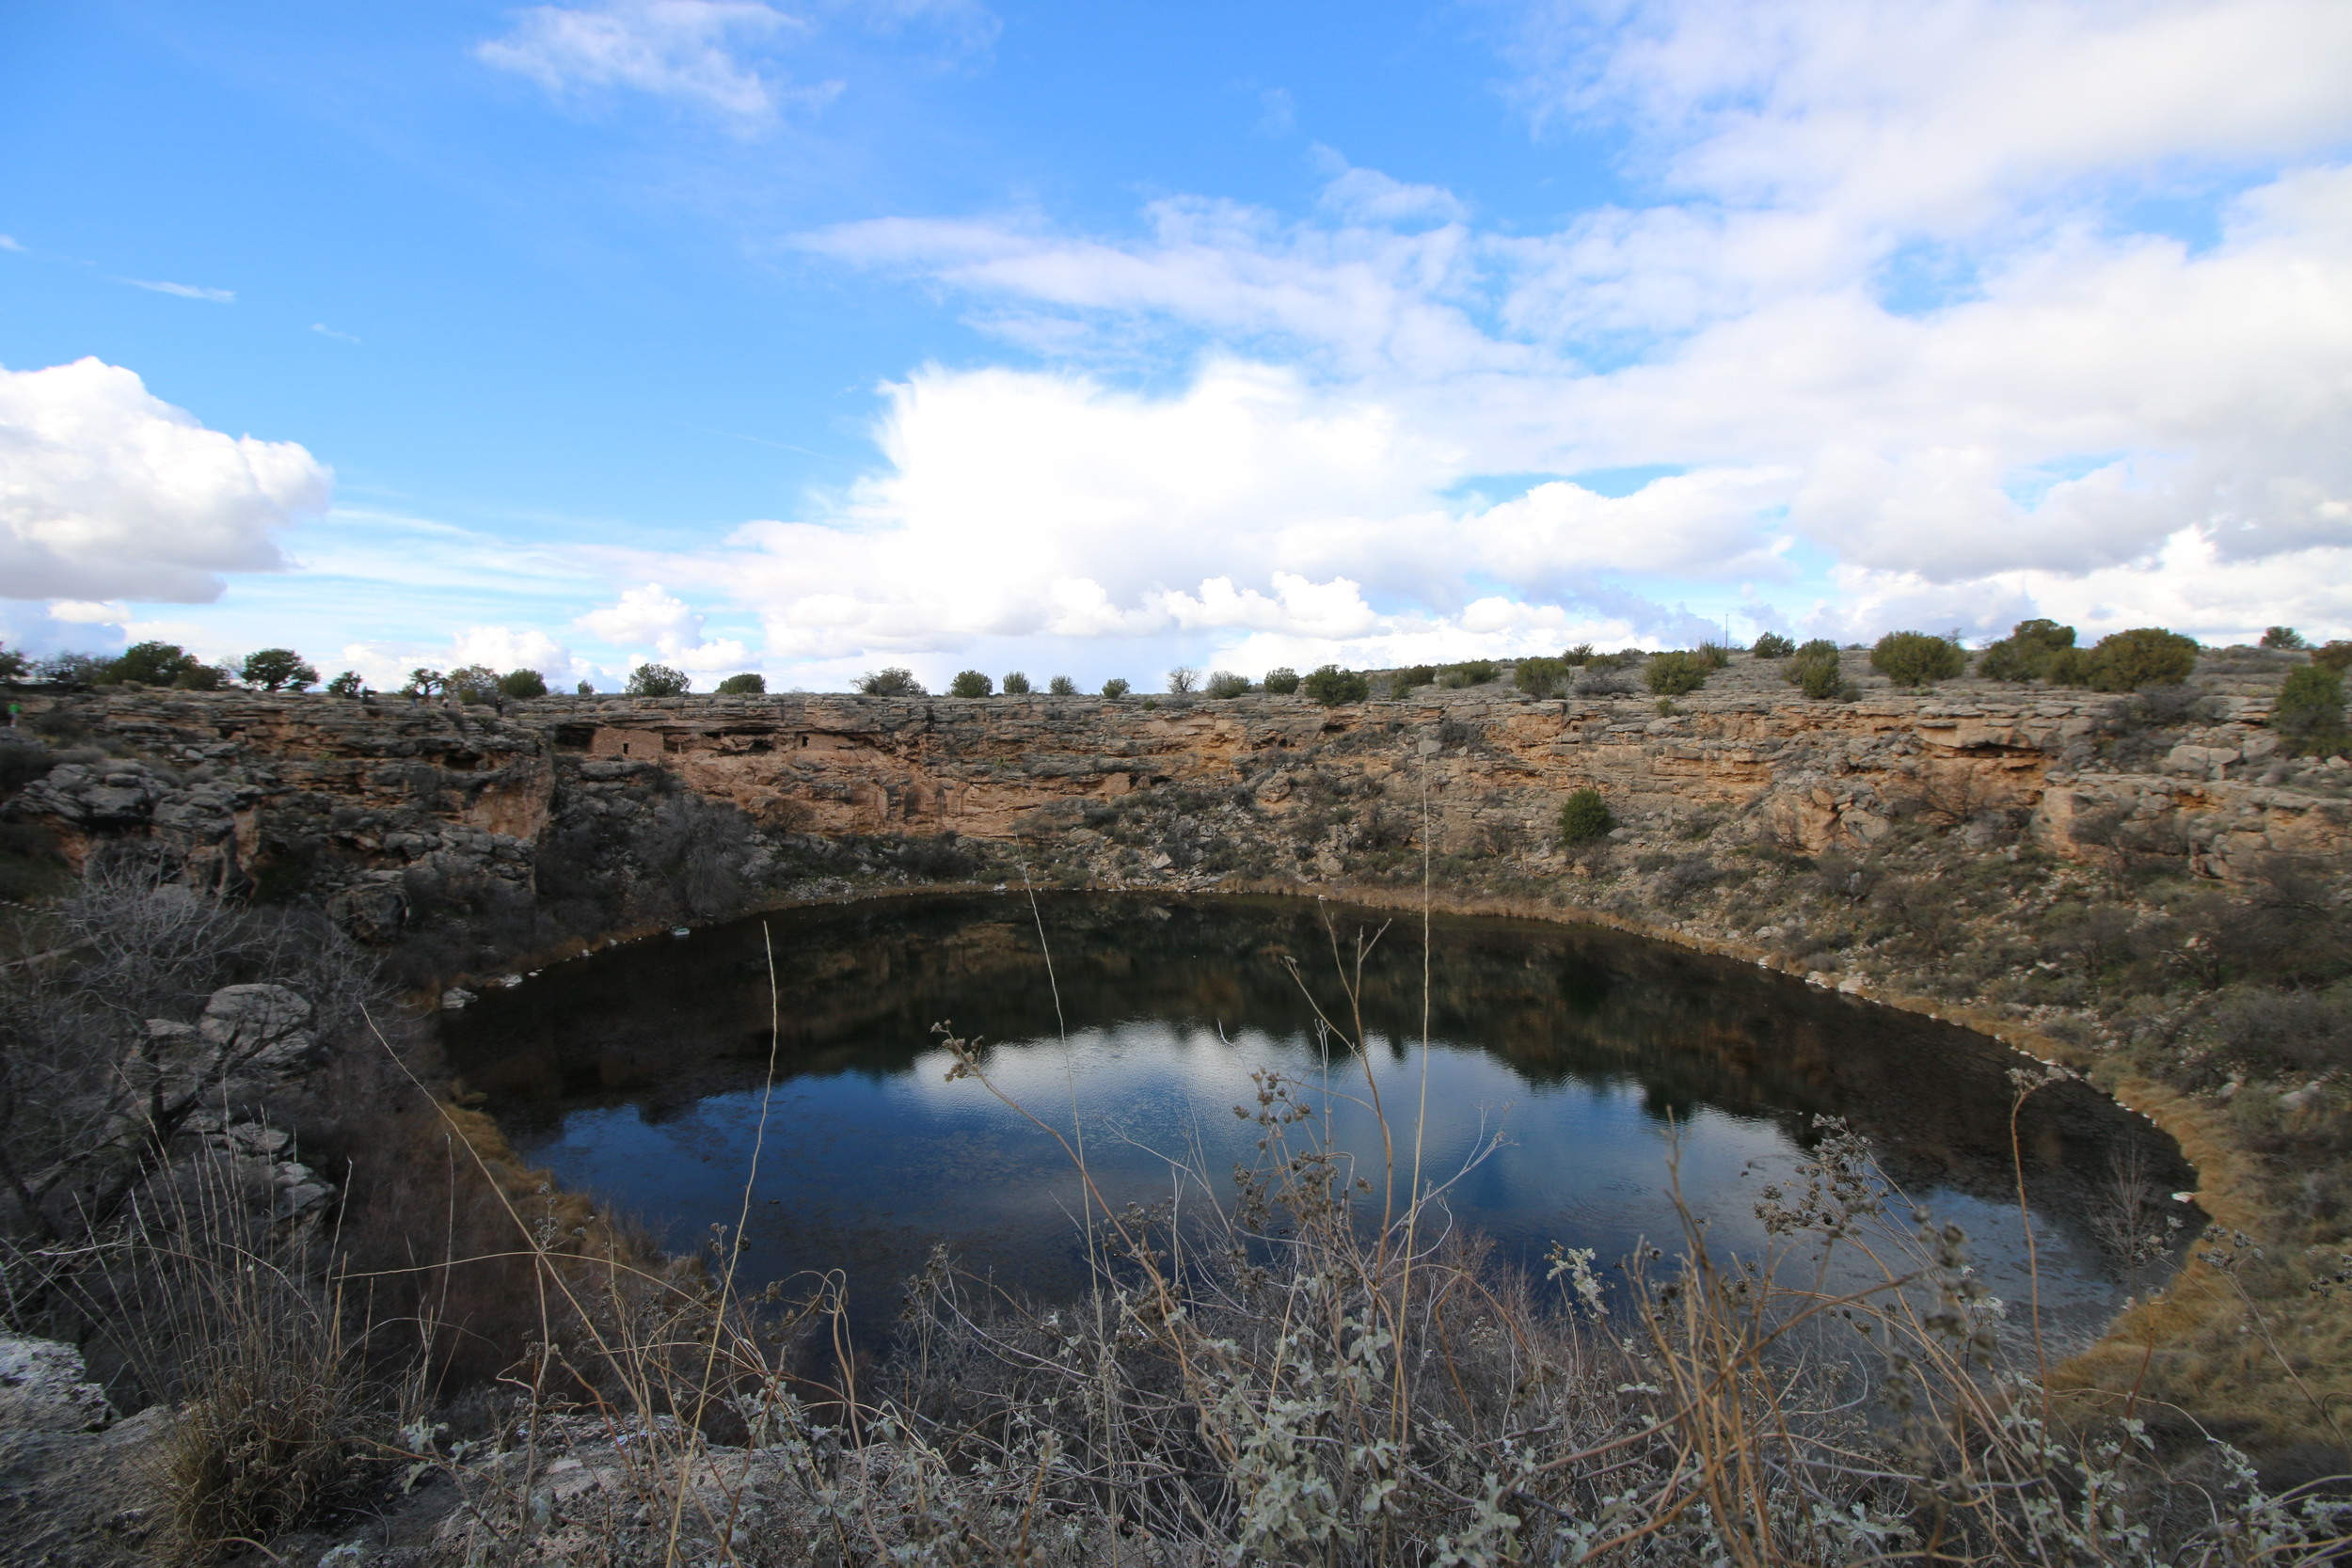 Montezuma Well: the 1,500,000 US gallons of water which emerge here daily takes 10 to 13 million years to flow from the Colorado Plateau.